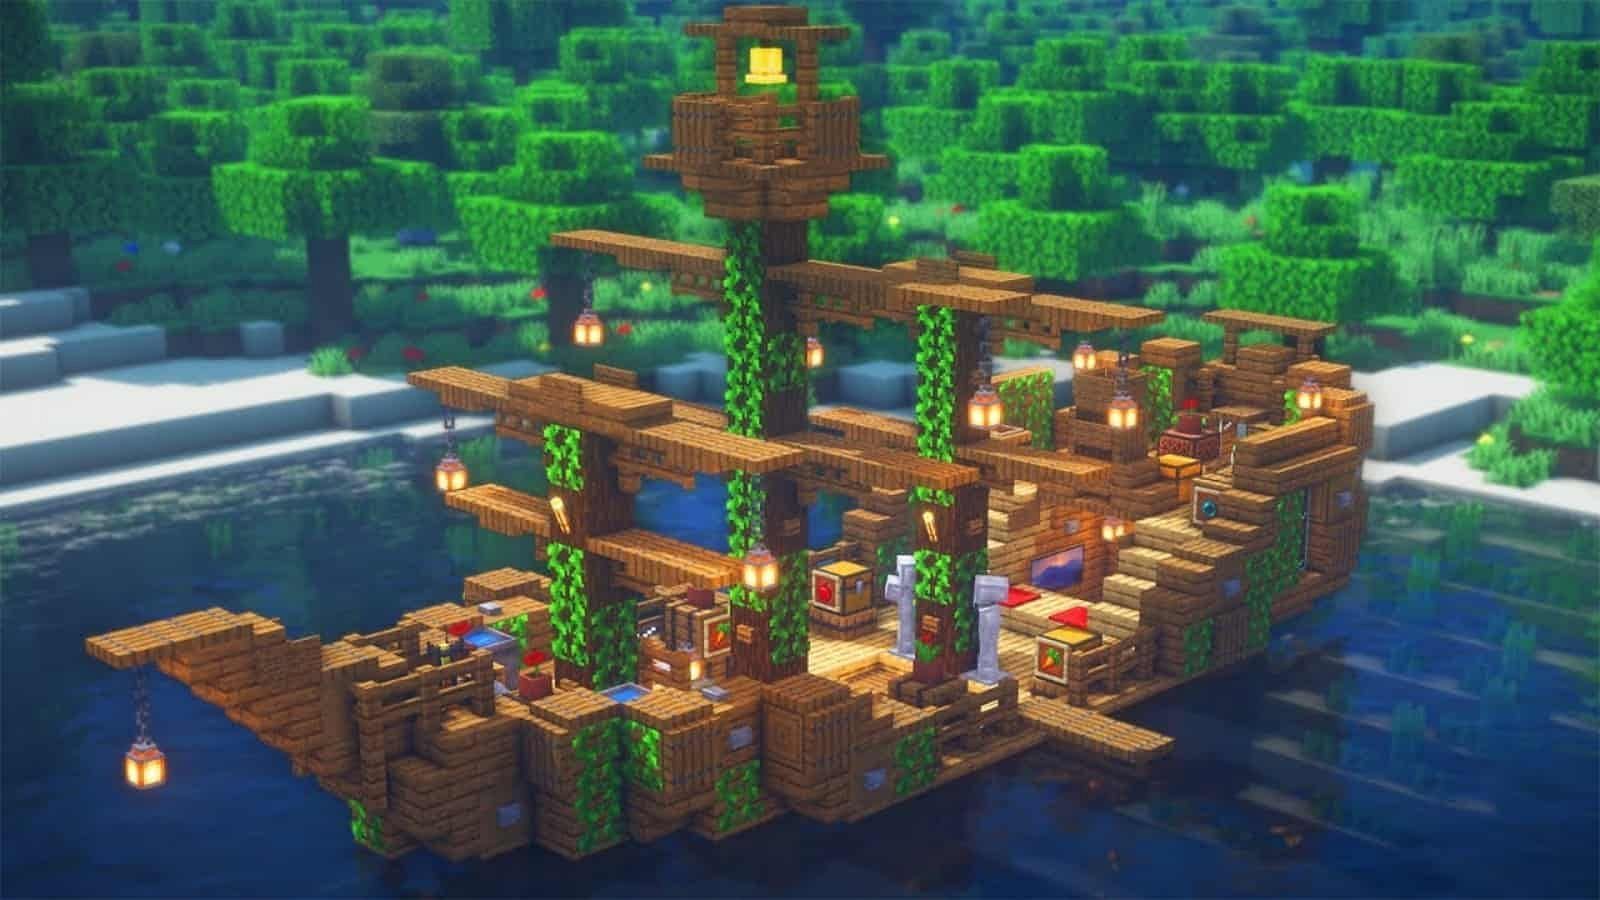 A shipwreck in Minecraft (Image by Minecraft)